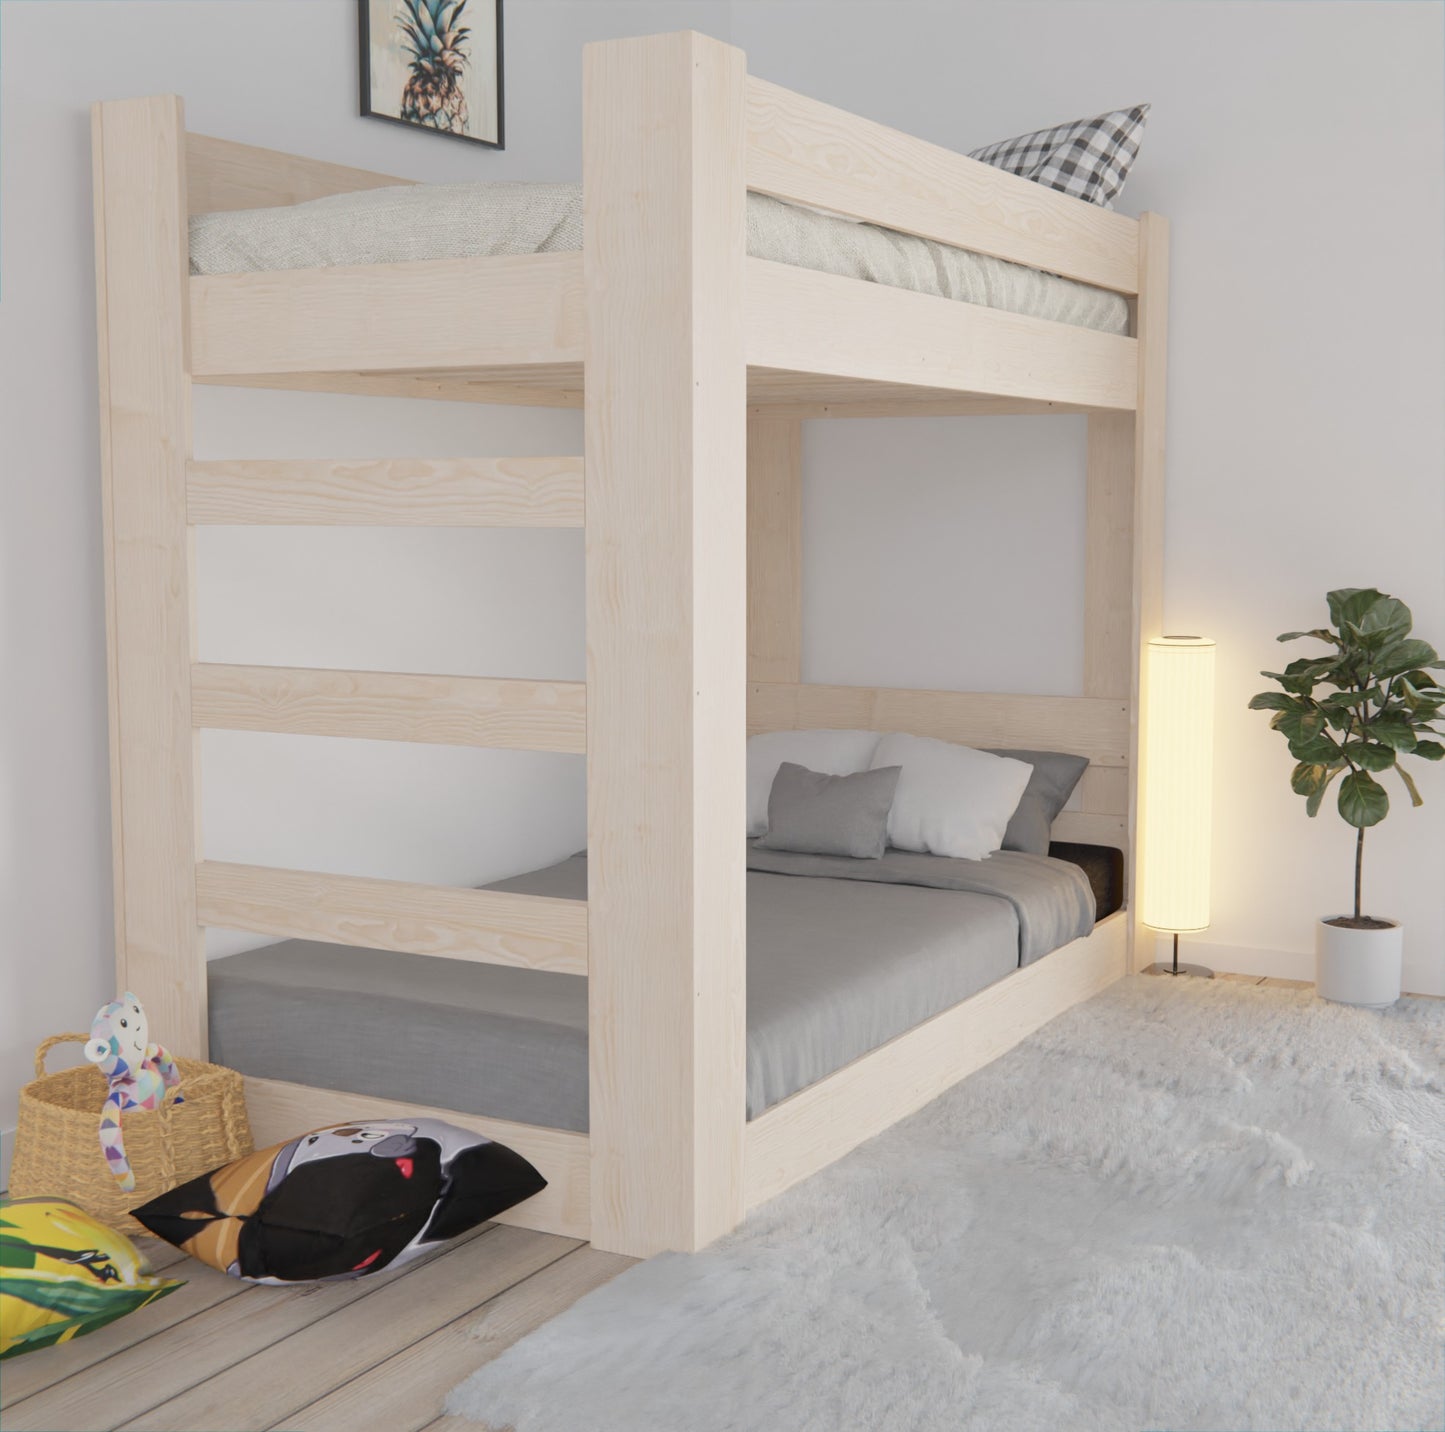 Save space and money with our budget-friendly bunk bed. With adjustable height and an optional drawer, it's a smart investment for your home.